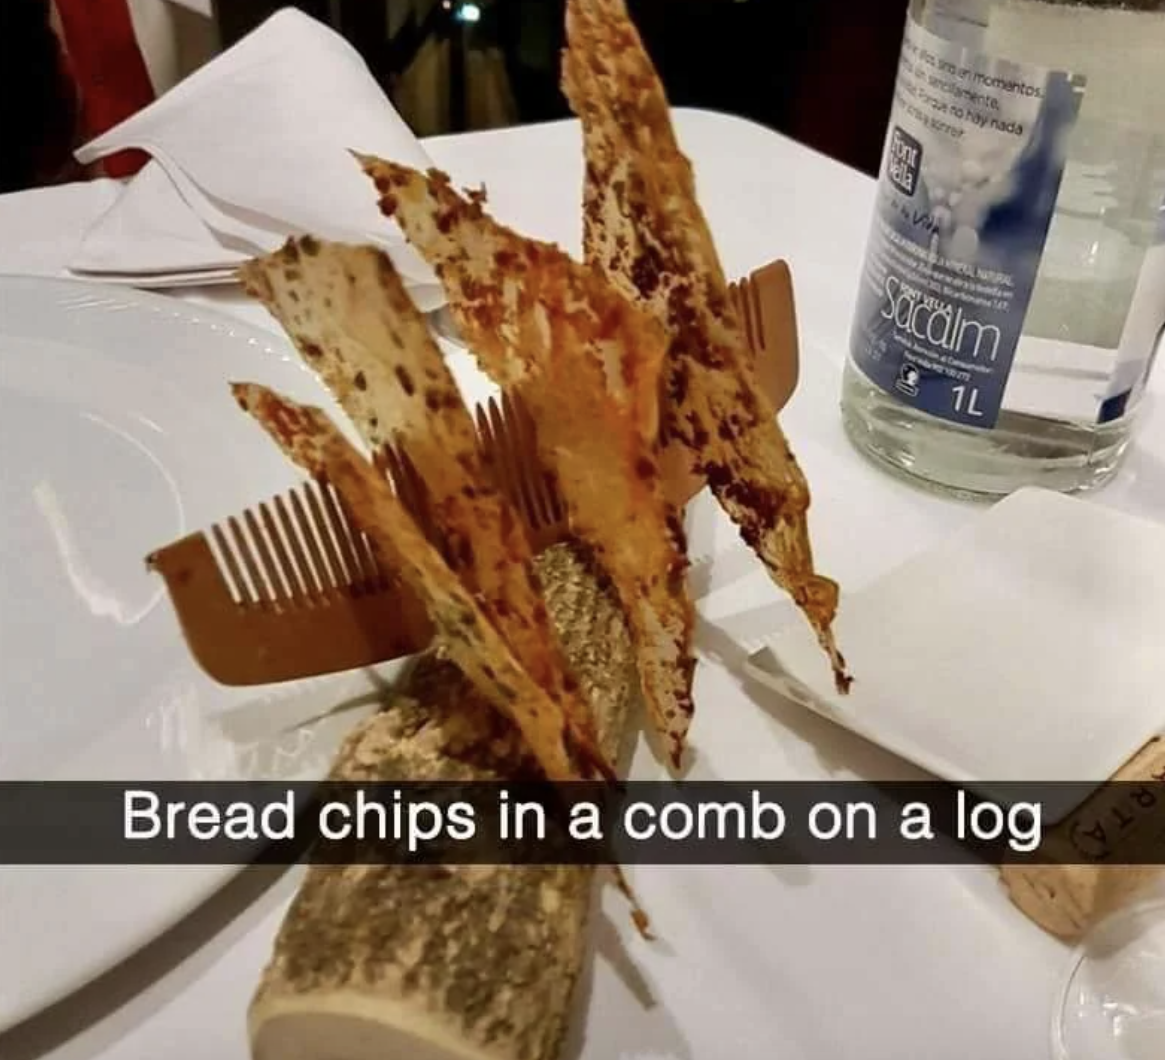 Bread chips creatively presented in a comb shape atop a wooden log at a dining table setting